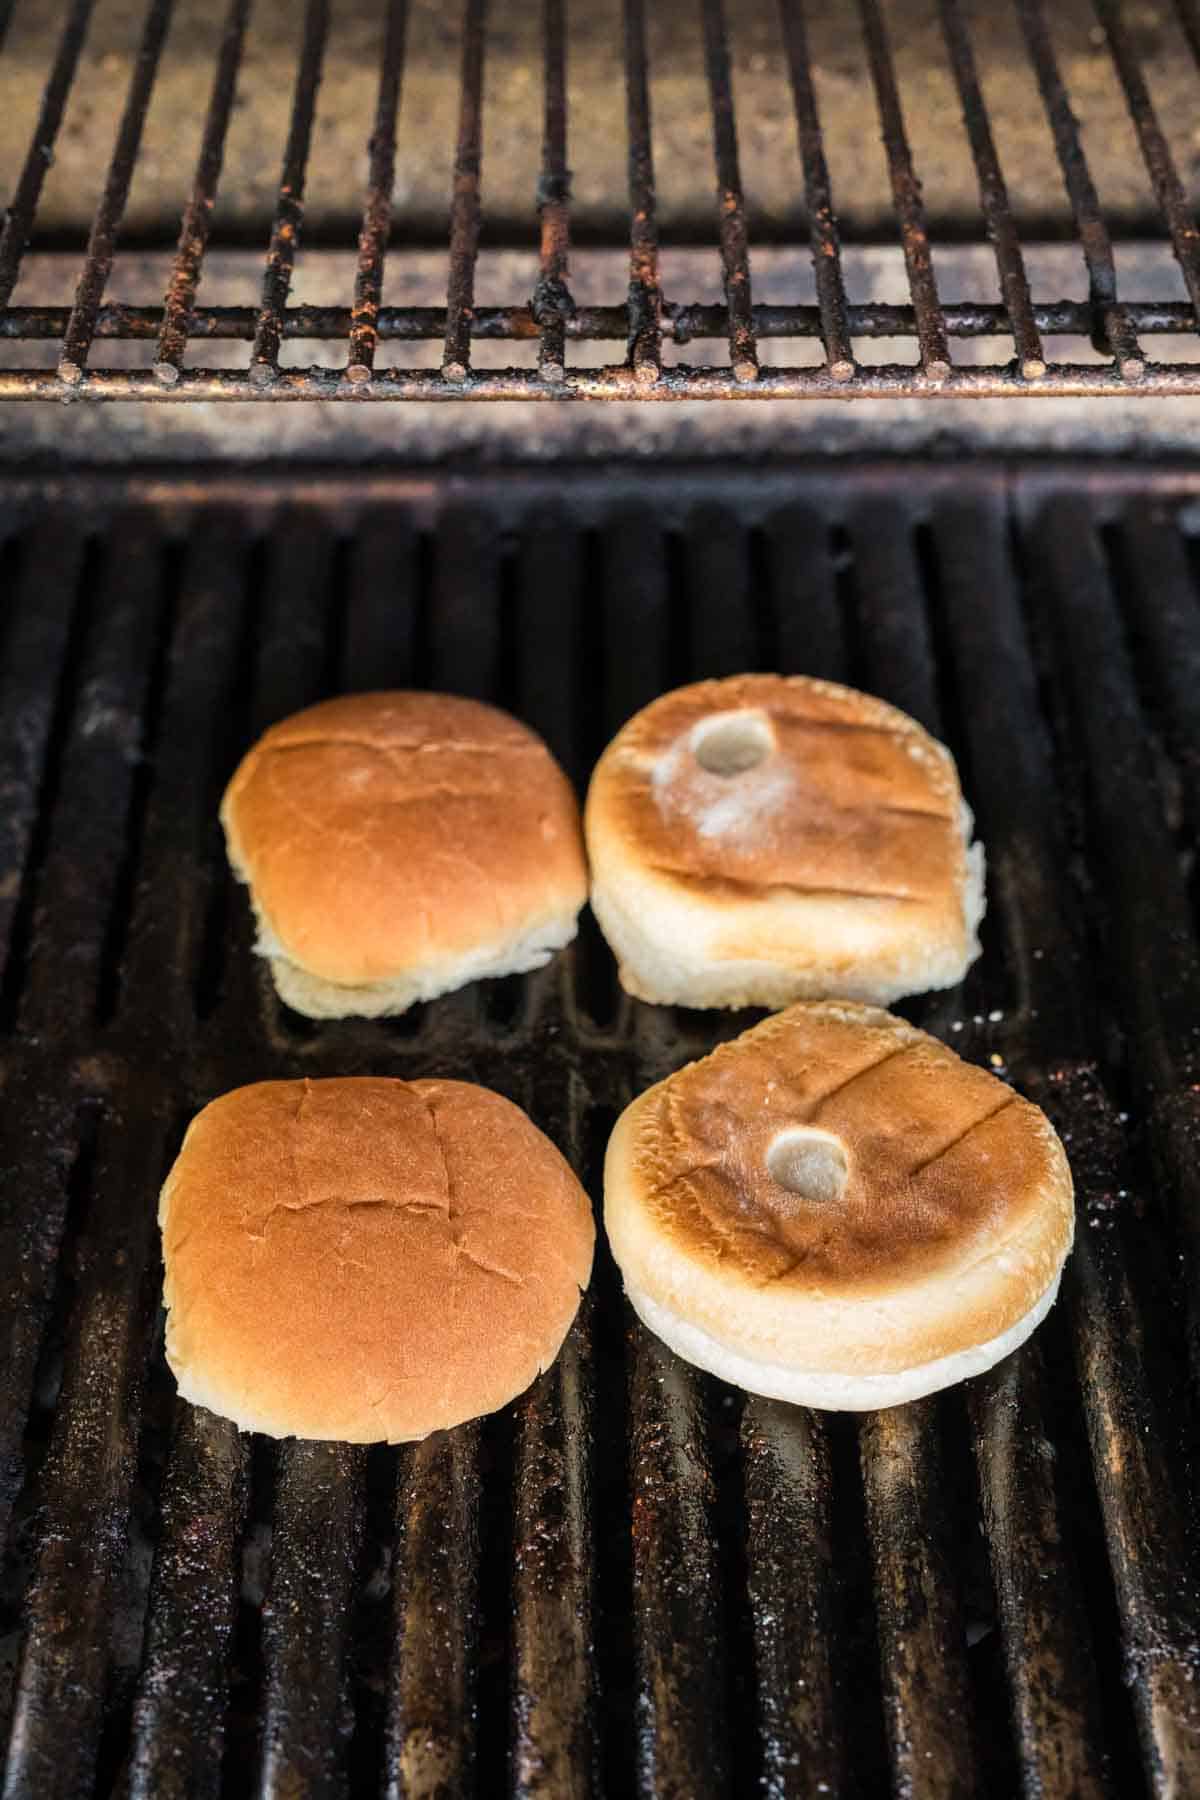 Toasting the buns on the grill